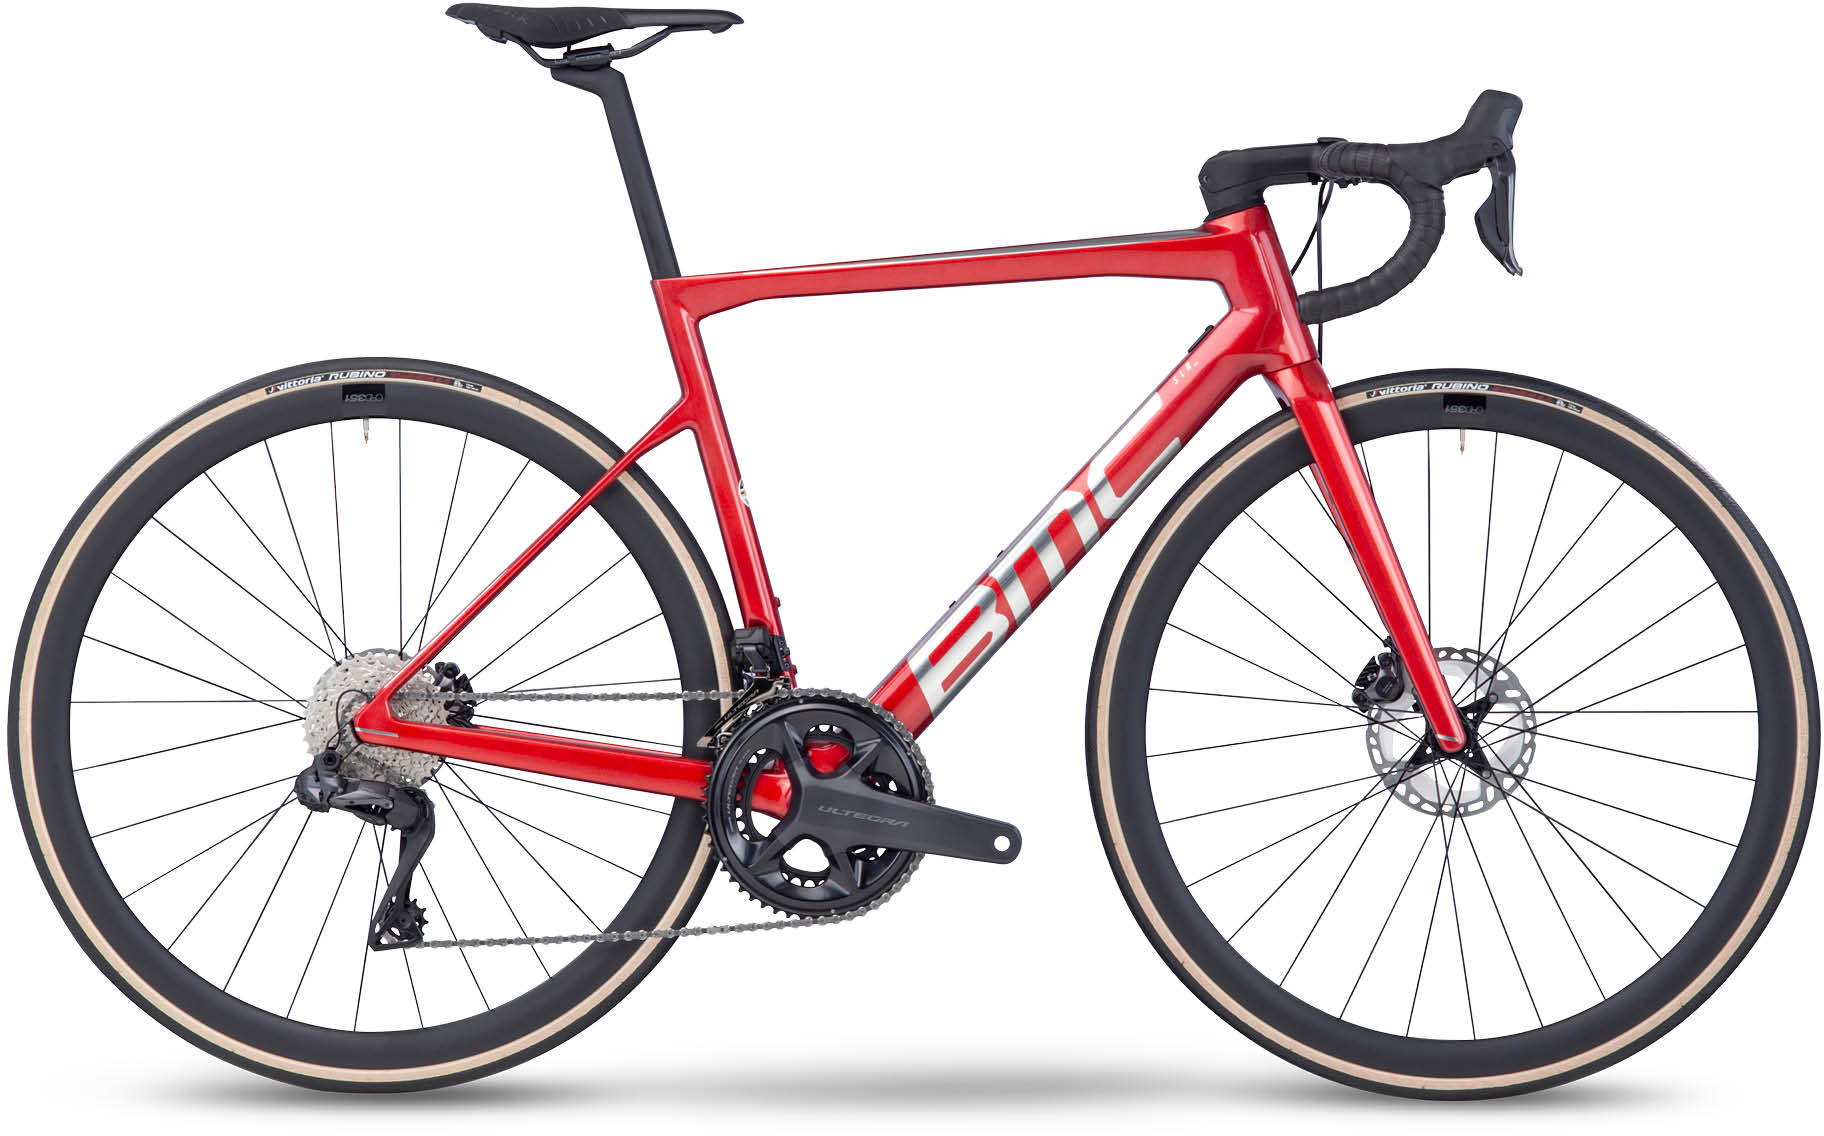 Bmc-23-10611-012-teammachine-slr-one-prisma-red-brushed-alloy-1_1